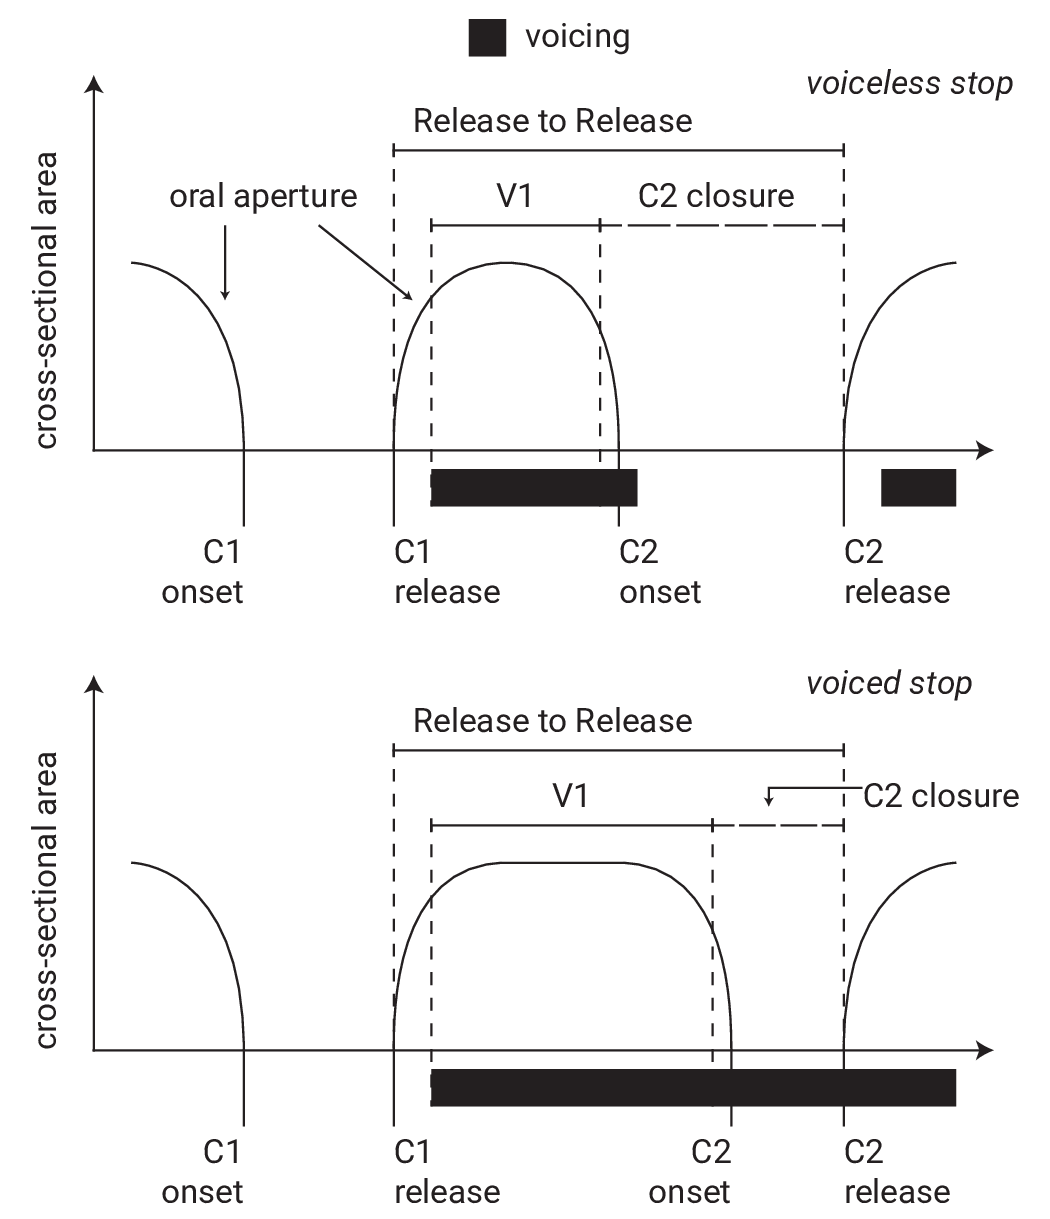 A schematic representation of the oral cavity cross-sectional area, as inferred from acoustics. Design based on @esposito2002. The top panel shows a CV́C sequence with a voiceless C2, the bottom panel with a voiced C2. Oral cavity aperture (on the *y*-axis, as the inverse of oral constriction) through time (on the *x*-axis) is represented by the black line. Lower values represent a more constricted oral tract (a contoid configuration), while higher values indicate a more open oral tract (a vocoid configuration). The black bars below the time axis represent voicing (vocal fold vibration). Various landmarks and intervals are indicated in the schematic.